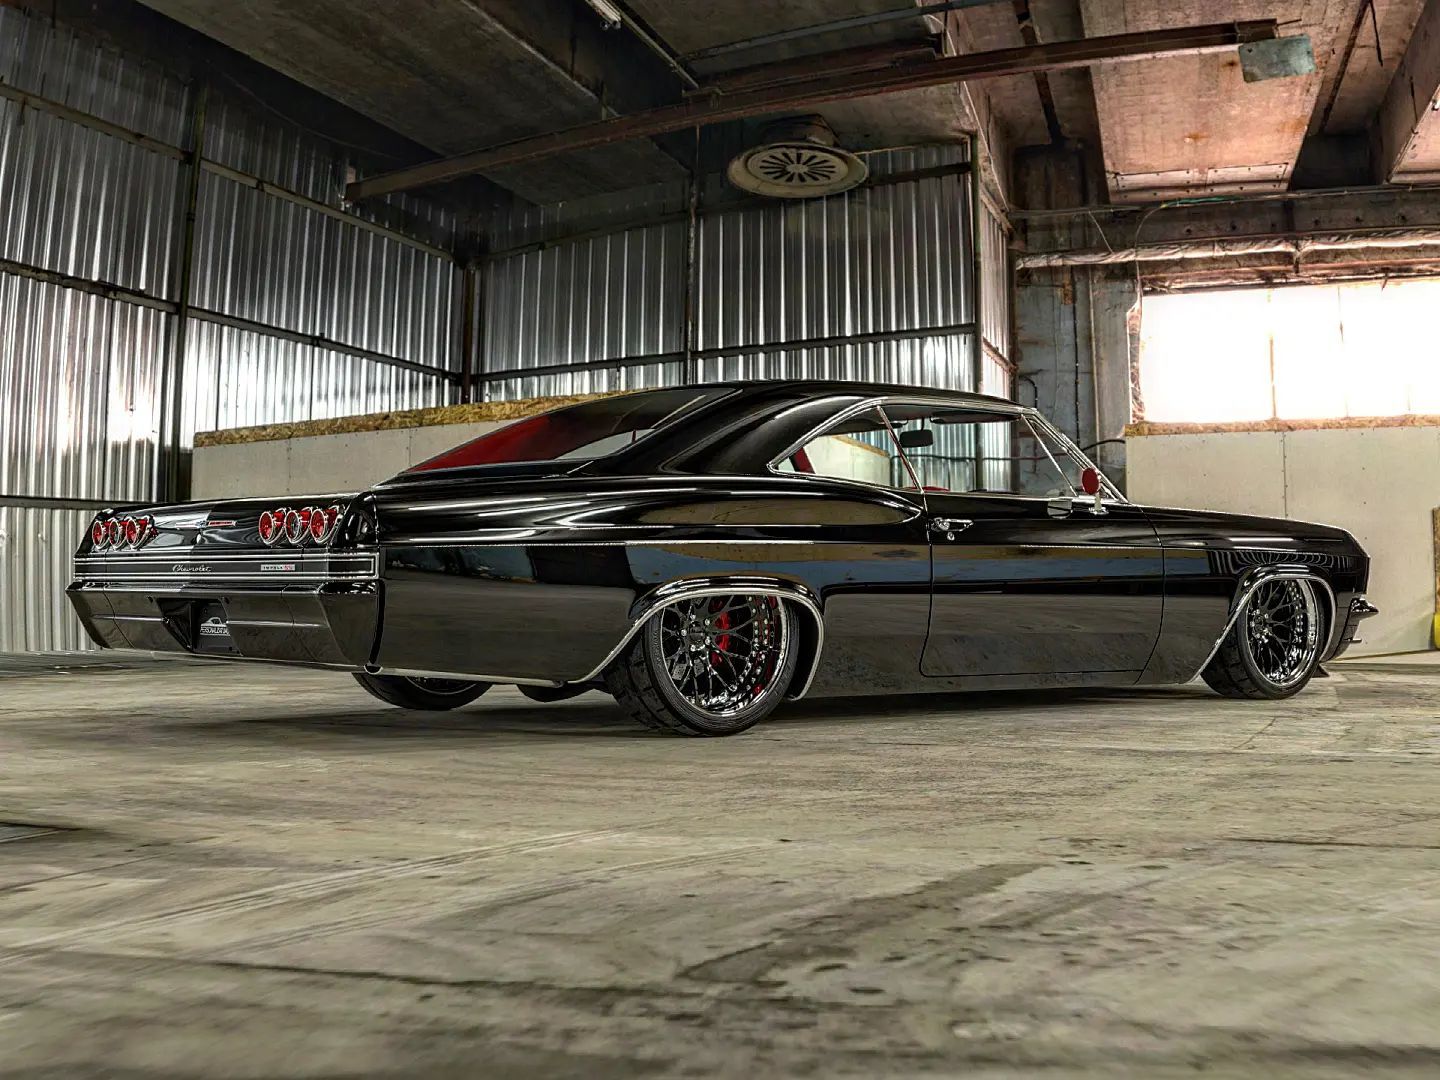 This Slammed 1965 Chevy Impala Brings Back Memories Of A Lost Automotive Era